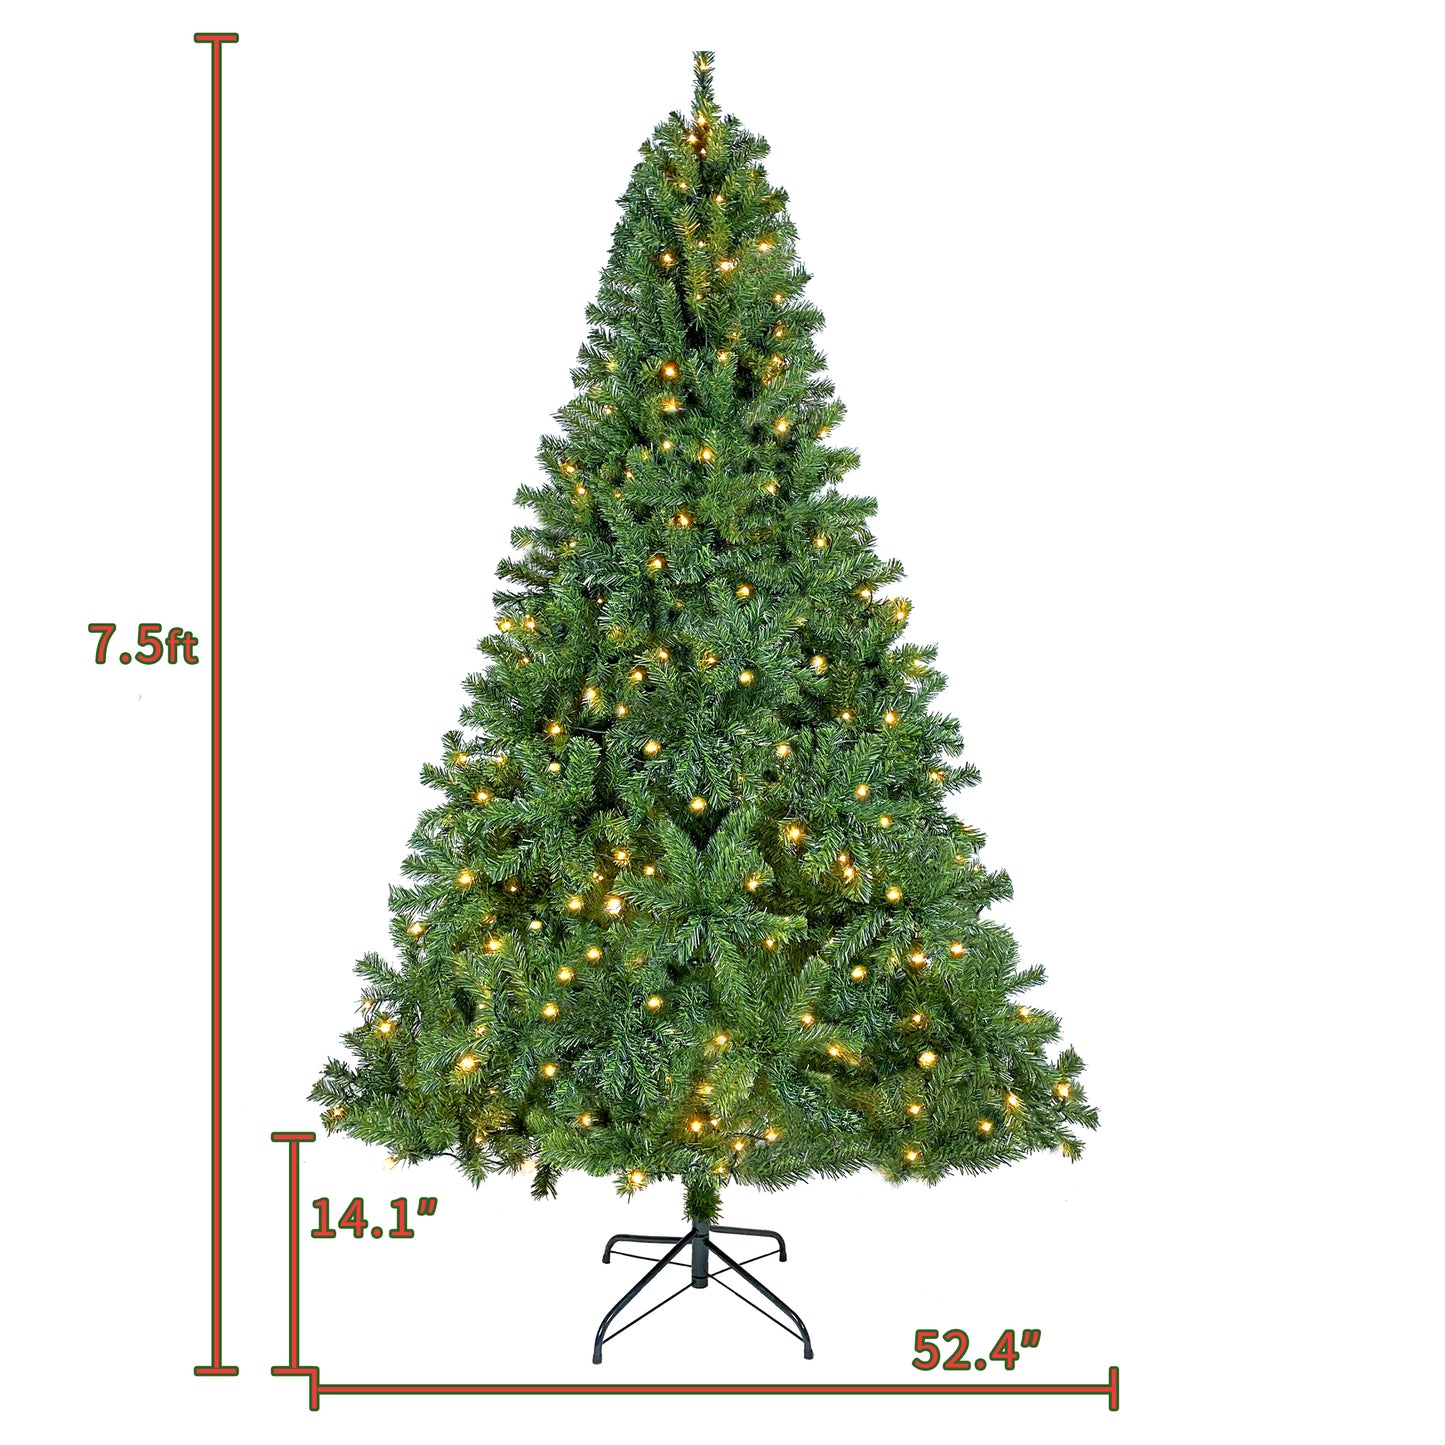 7.5ft Artificial Christmas Tree, SYNGAR Pre-Lit Xmas Tree with 400 Warm White LED Lights for Home/Party Decor, Holiday Spruce Christmas Tree with 1420 Tips, Metal Hinge & Foldable Stand, Y032